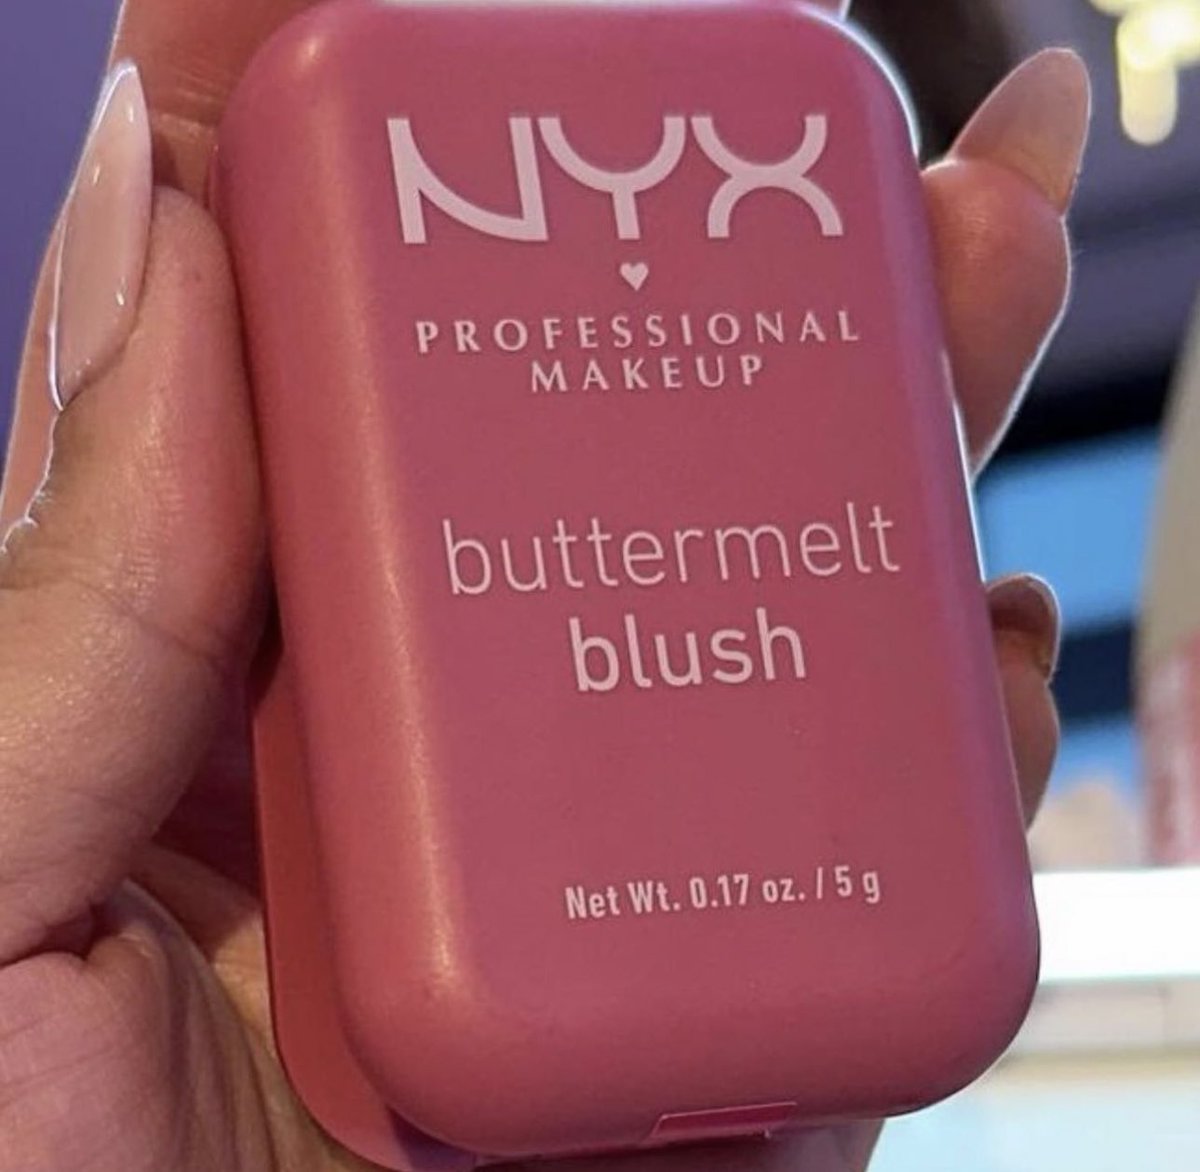 #Revealed 🚨😍 NEW! Buttermelt Blush #nyxcosmetics This formula melts into skin, silky-smooth skin, infused with mango butter, shea butter, and almond butter #ComingSoon 📸 @mrkendenis @the_atika